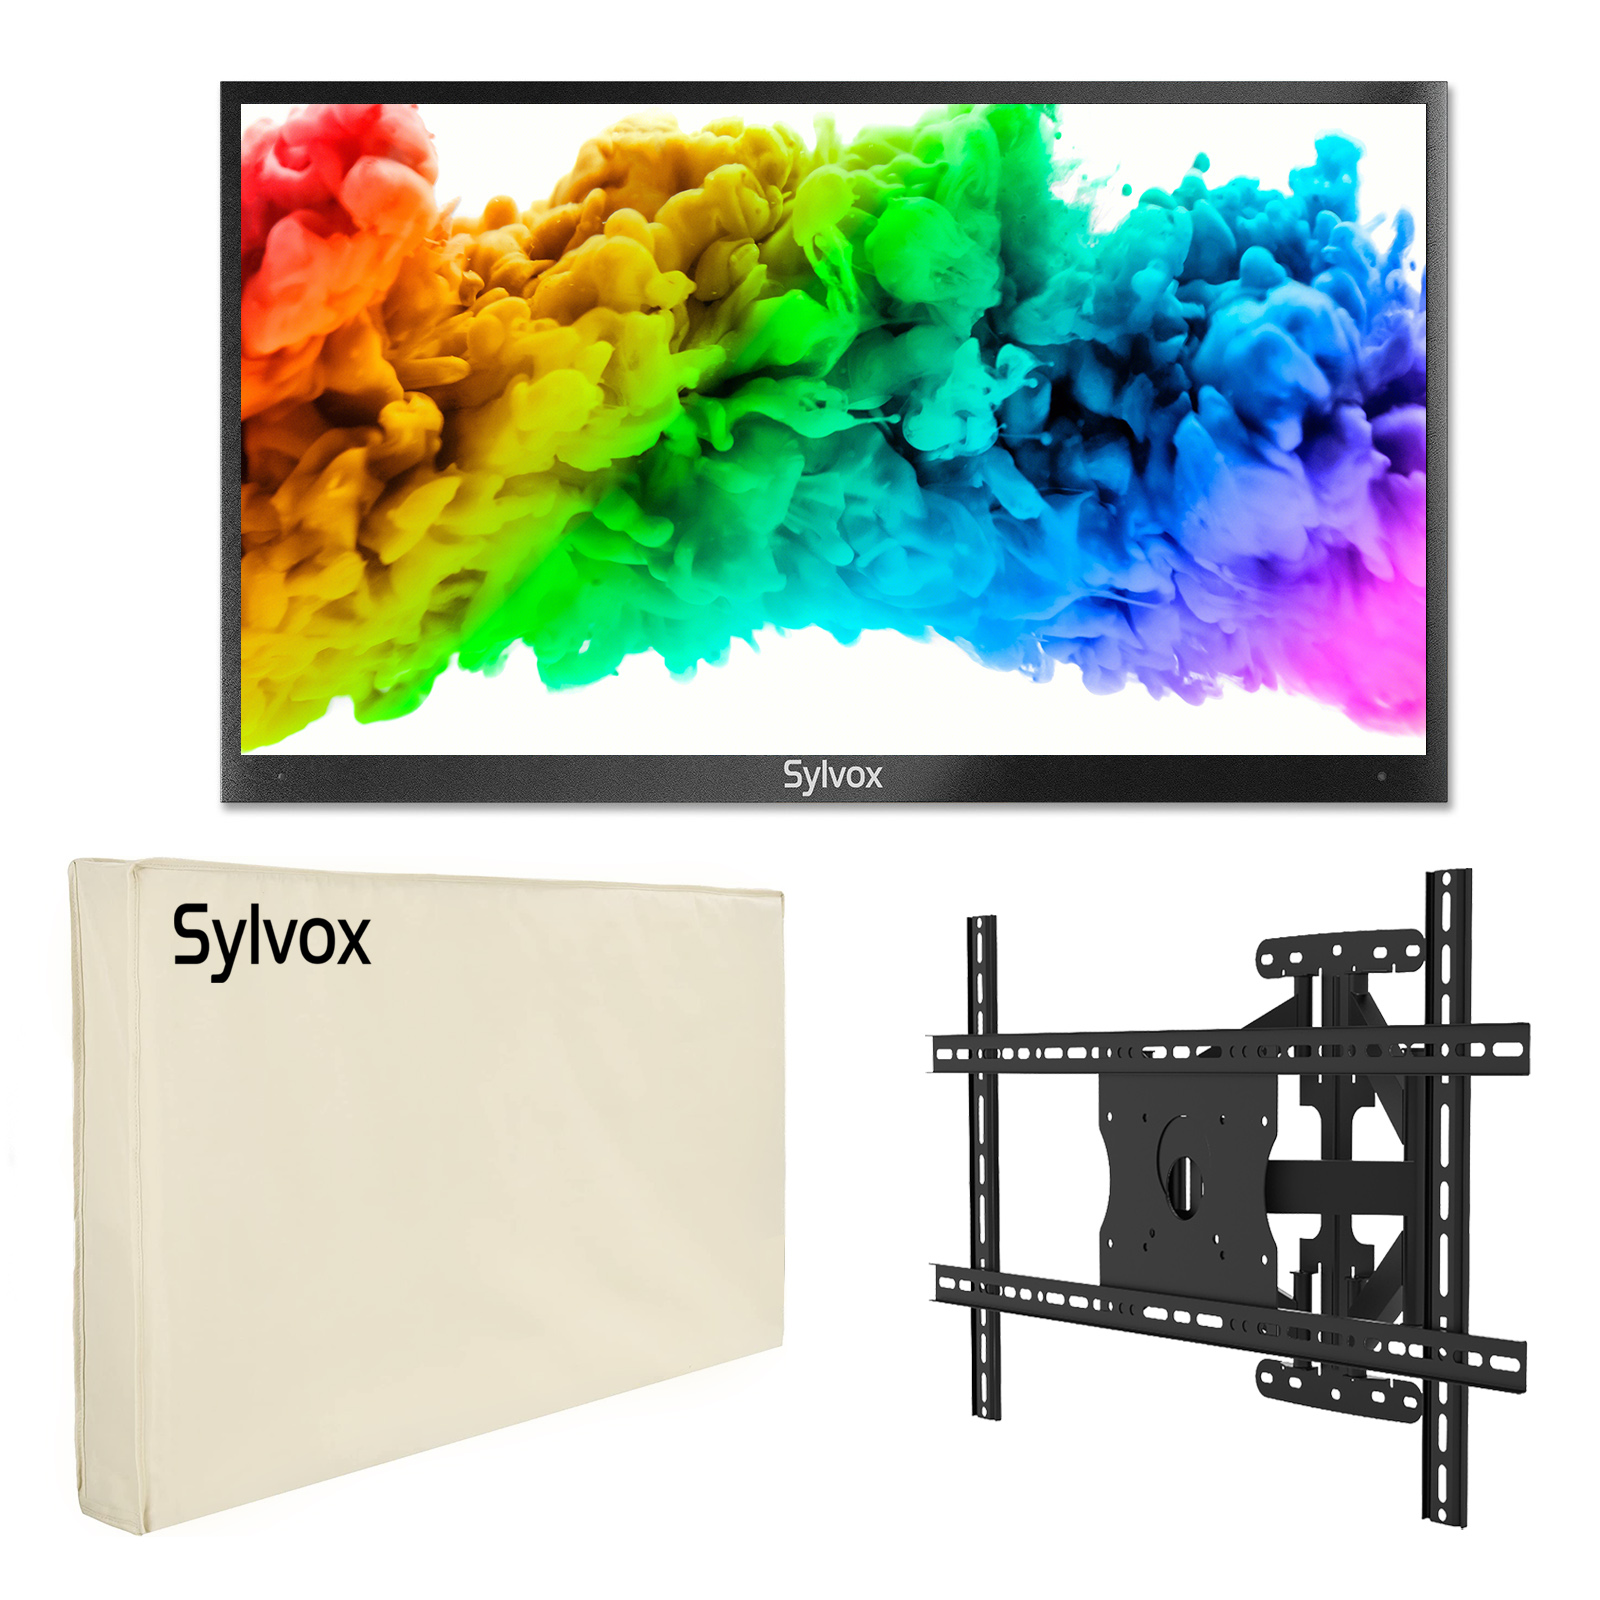 SYLVOX 43inch Outdoor TV+Wall Mount+Cover, IP55 Waterproof Smart TV Support Bluetooth & 2.4G WiFi, 1000nit 4K HDR For Partial Sun Area - image 1 of 14